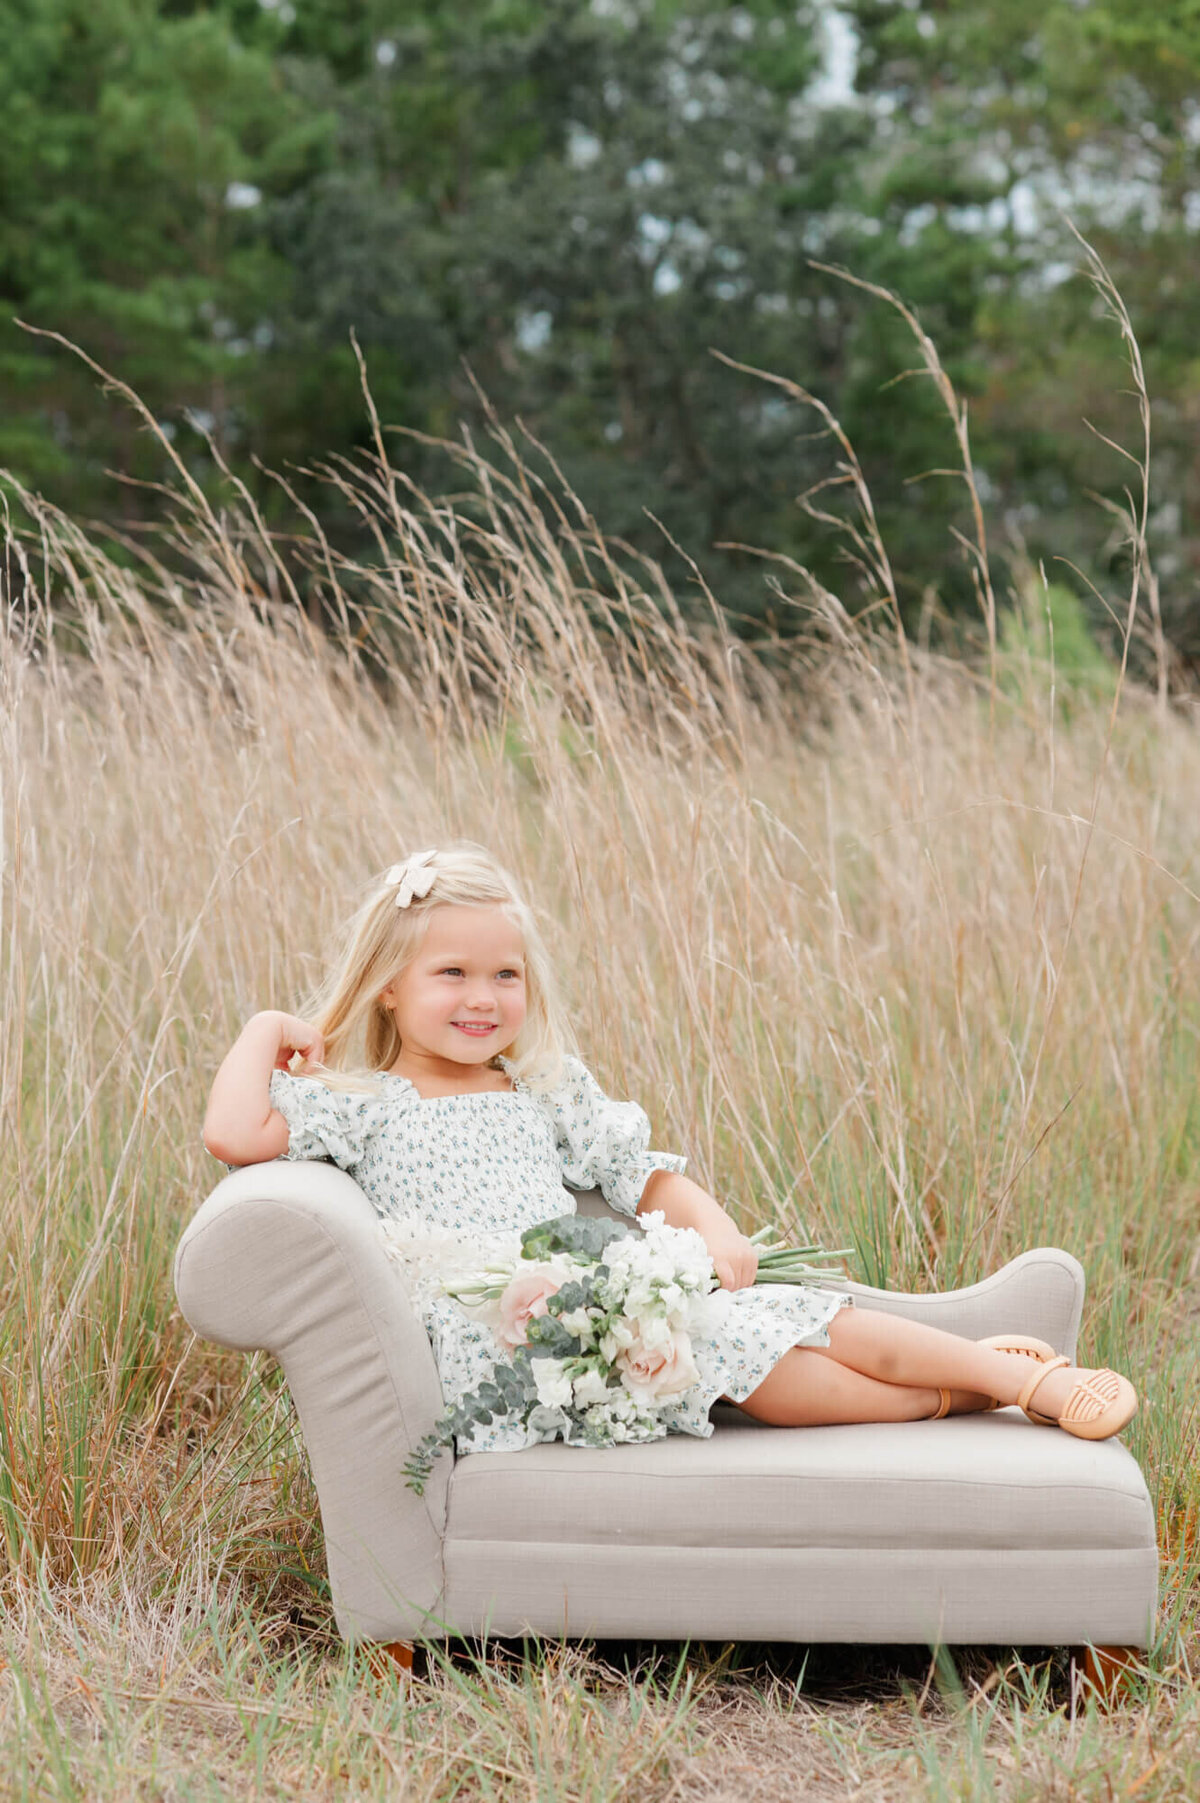 Young daughter sitting on beautiful neutral couch and smiling at her daddy while holding a flower bouquet